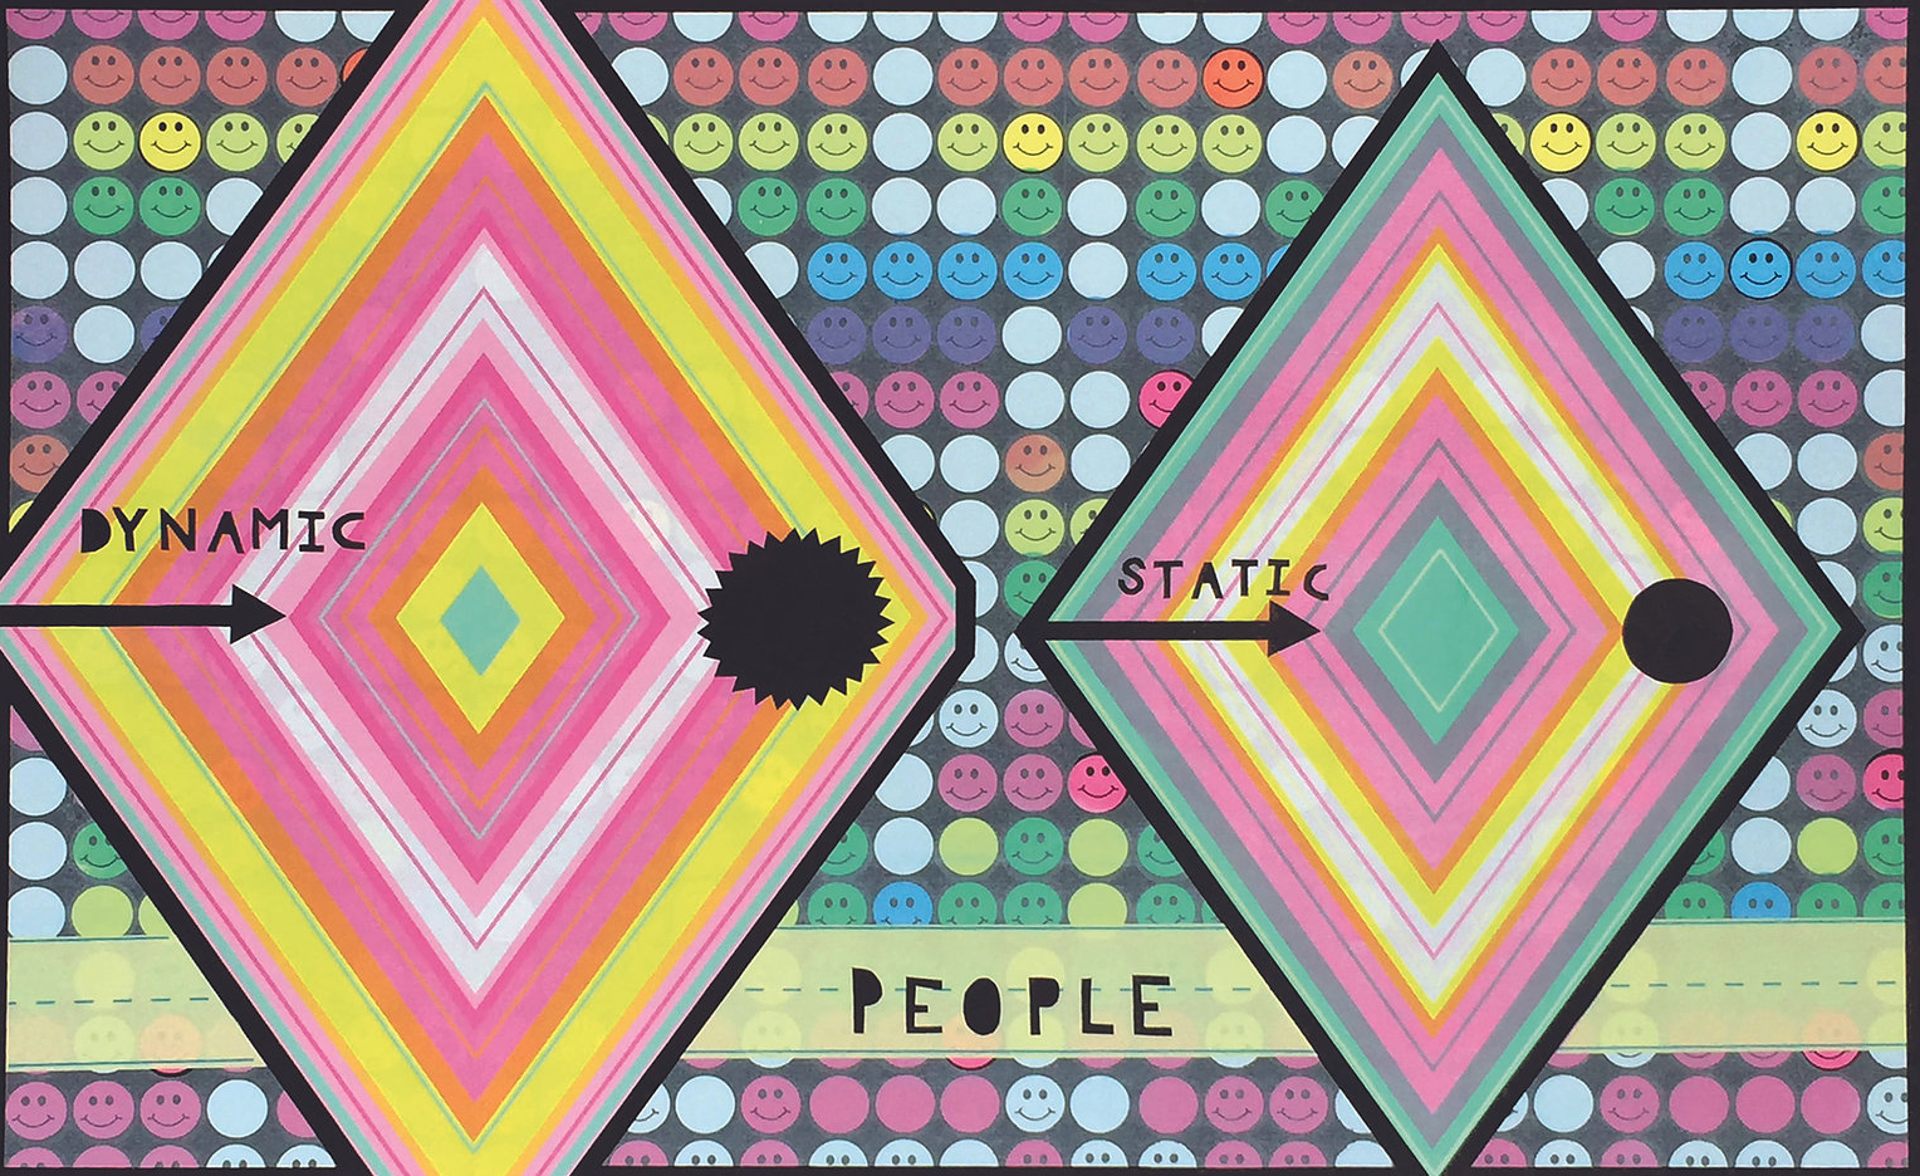 Dynamic and Static People by Chadwick Tolley